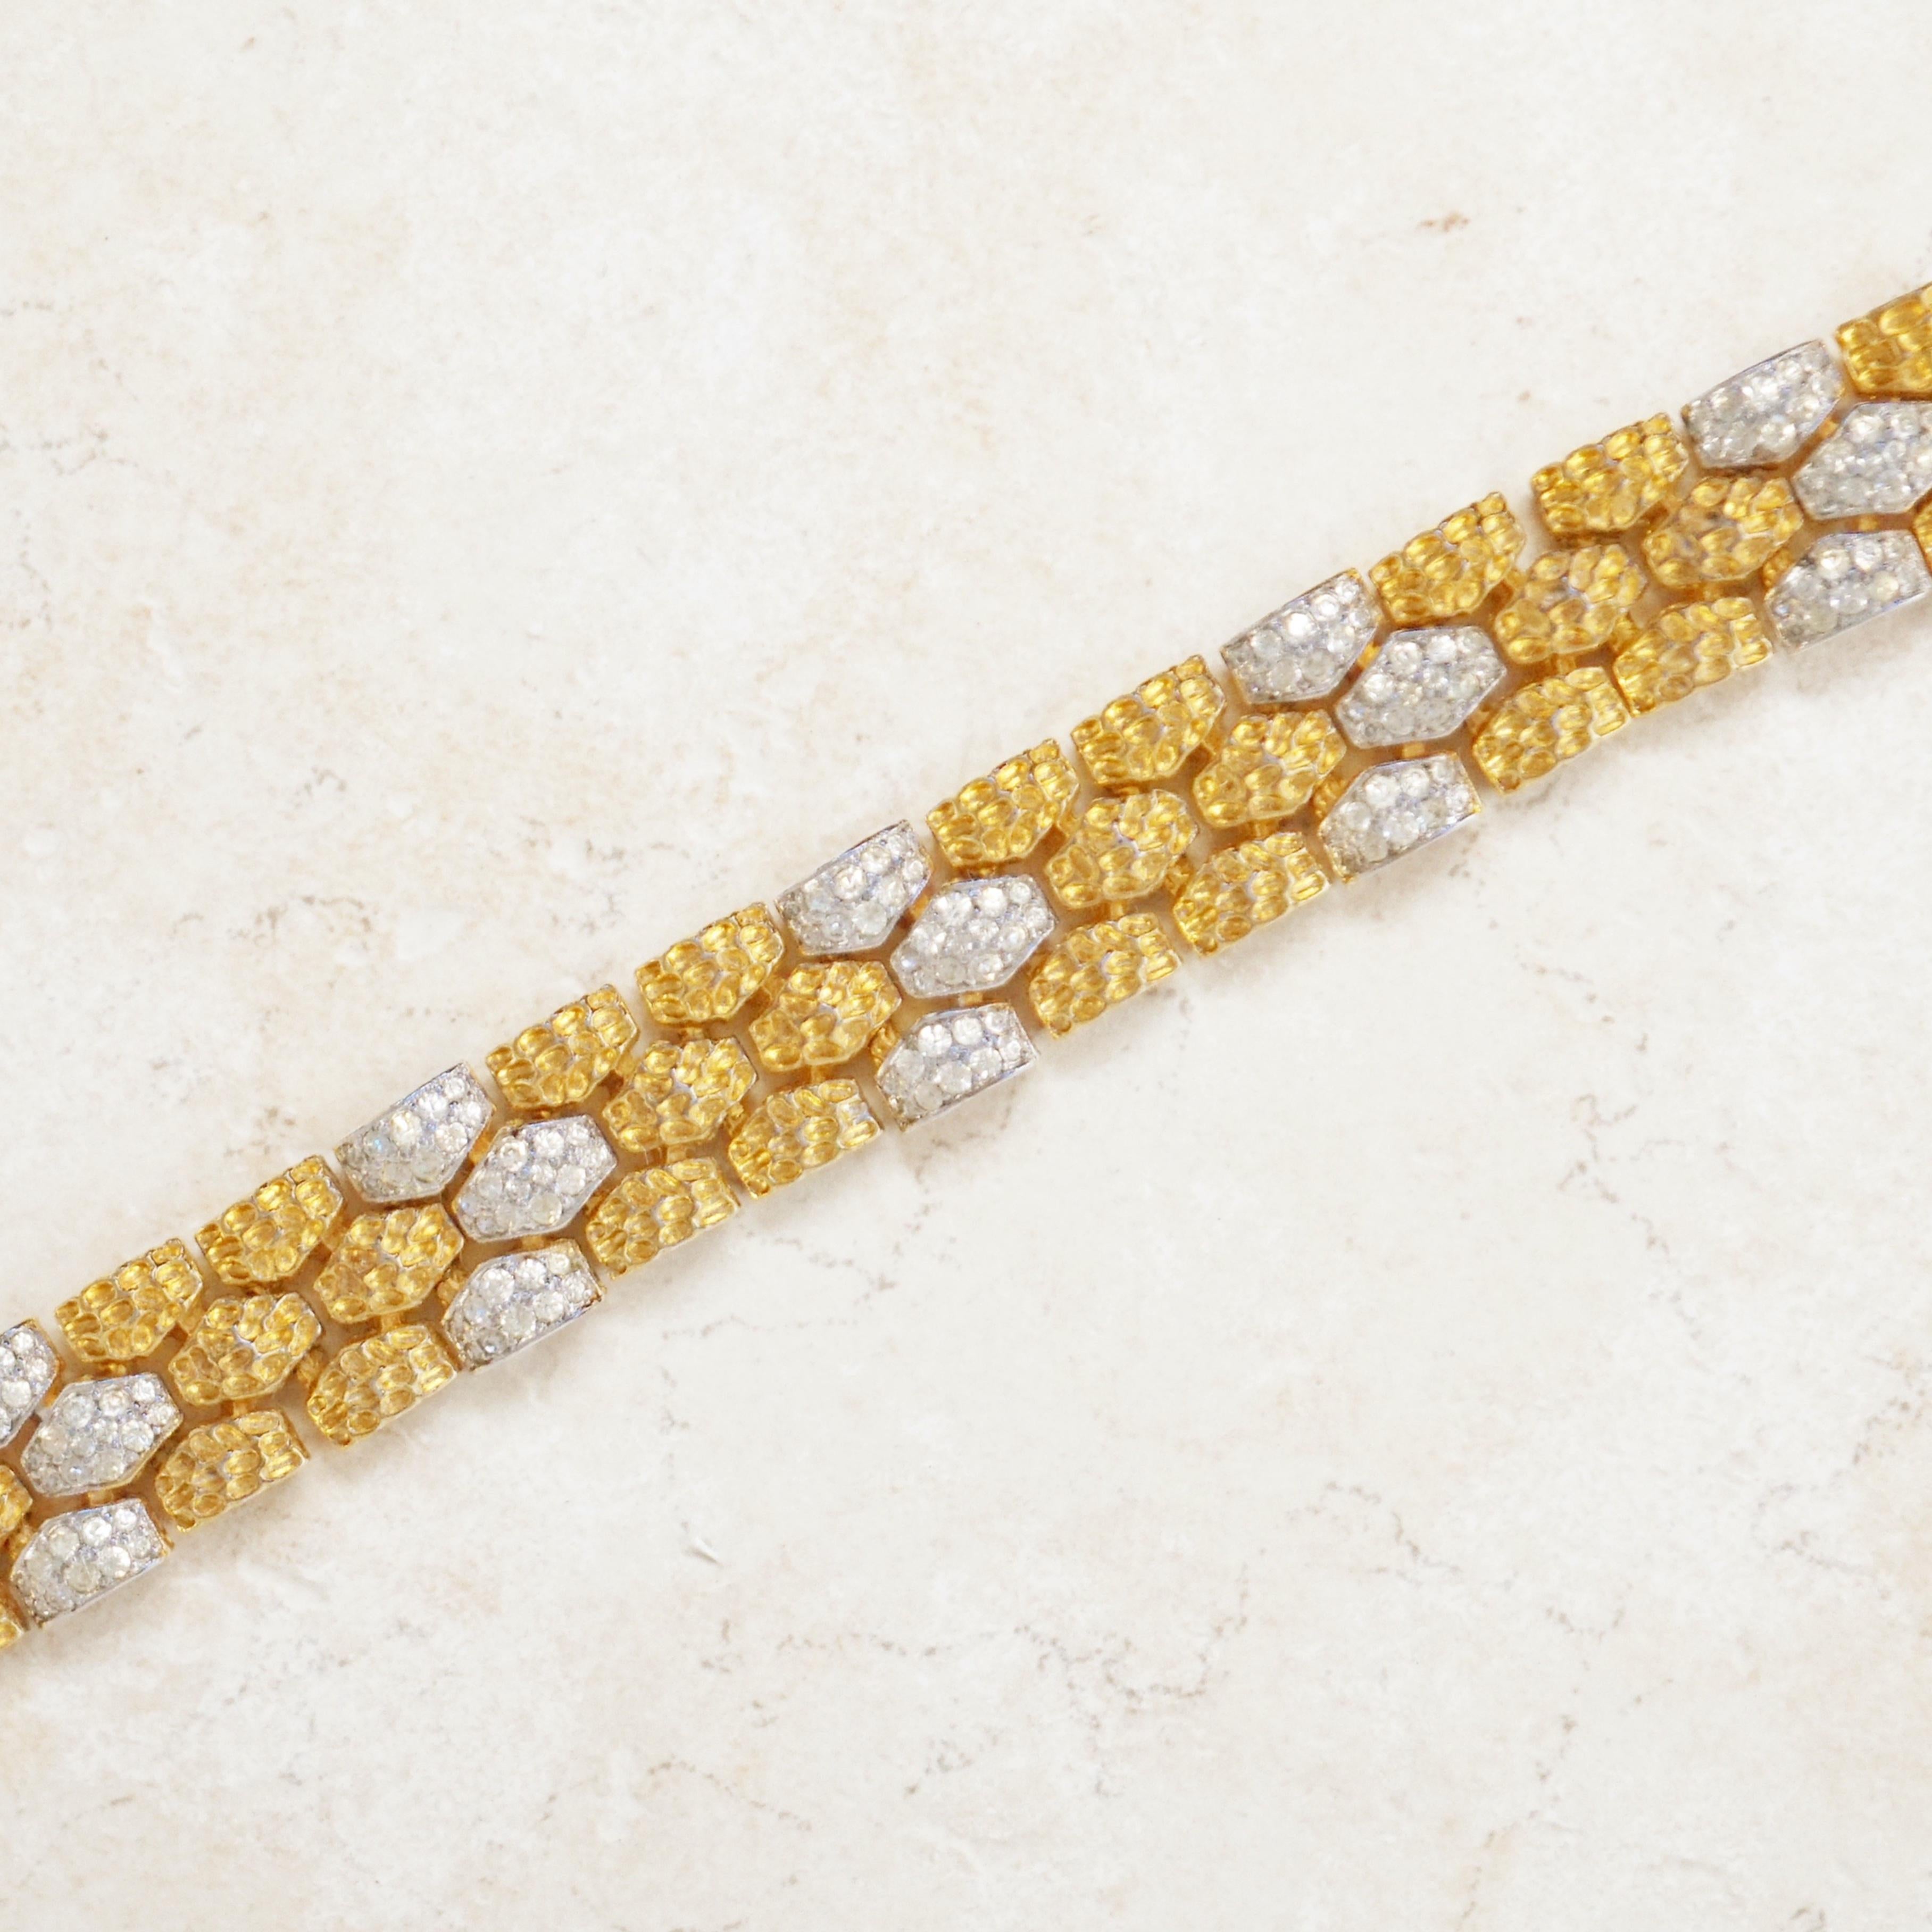 Vintage Two Tone Gilt & Rhinestone Textured Nugget Bracelet by Panetta, 1970s For Sale 2